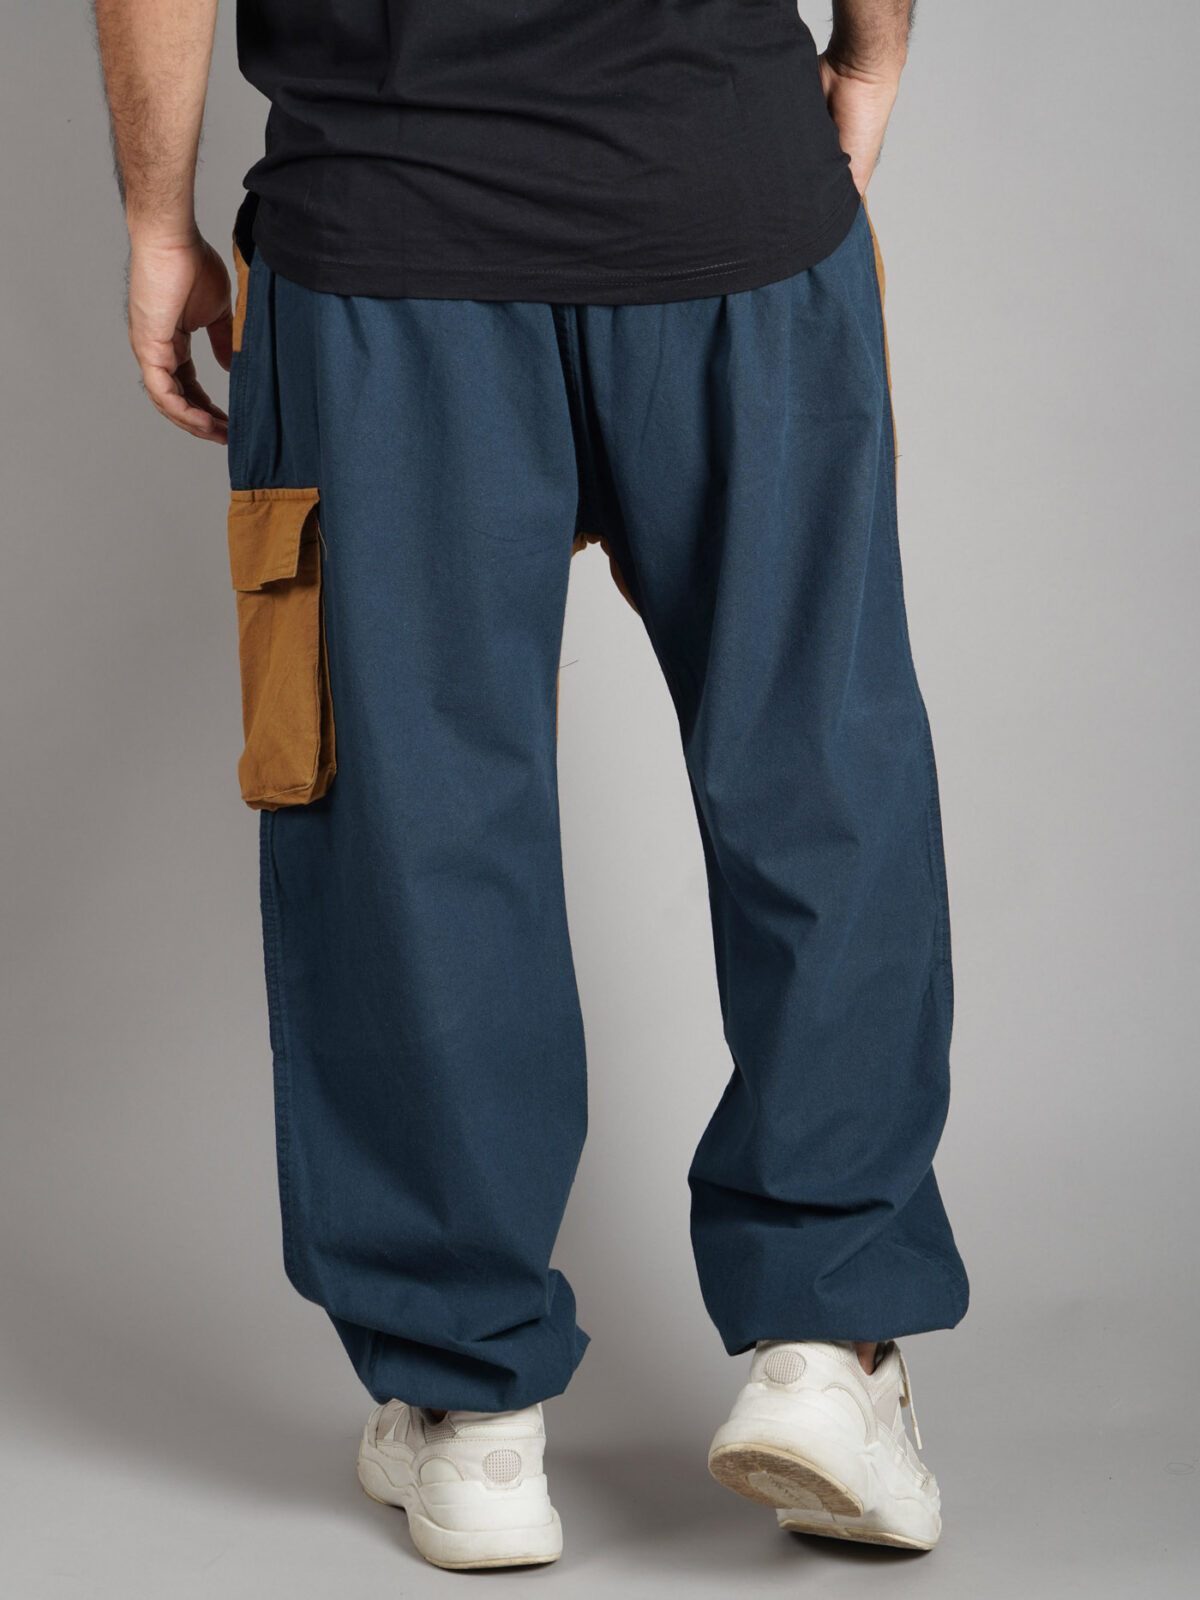 Duo Navy Tan Earthy Hoppers – Unisex Pants For Men And Women - Bombay ...